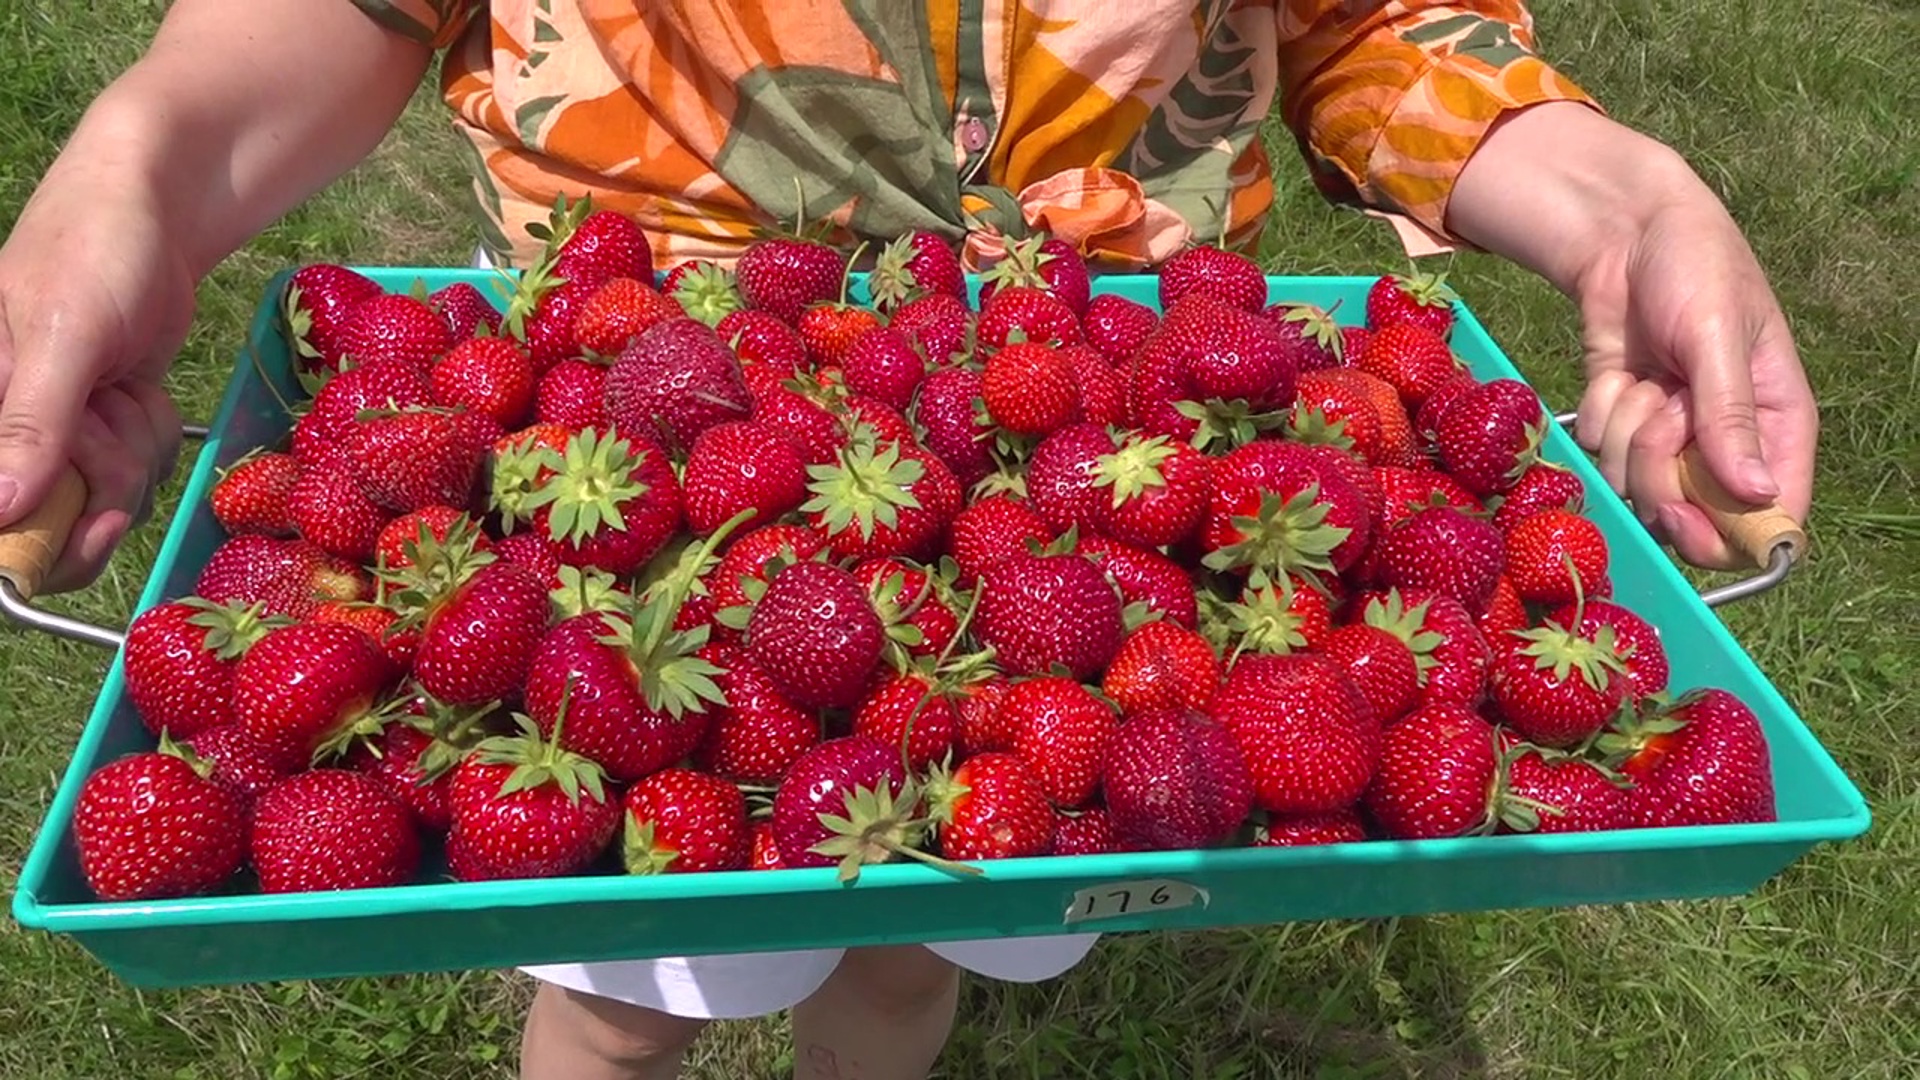 Strawberry season is here for parts of our area and the berries are big and bright in Columbia County.